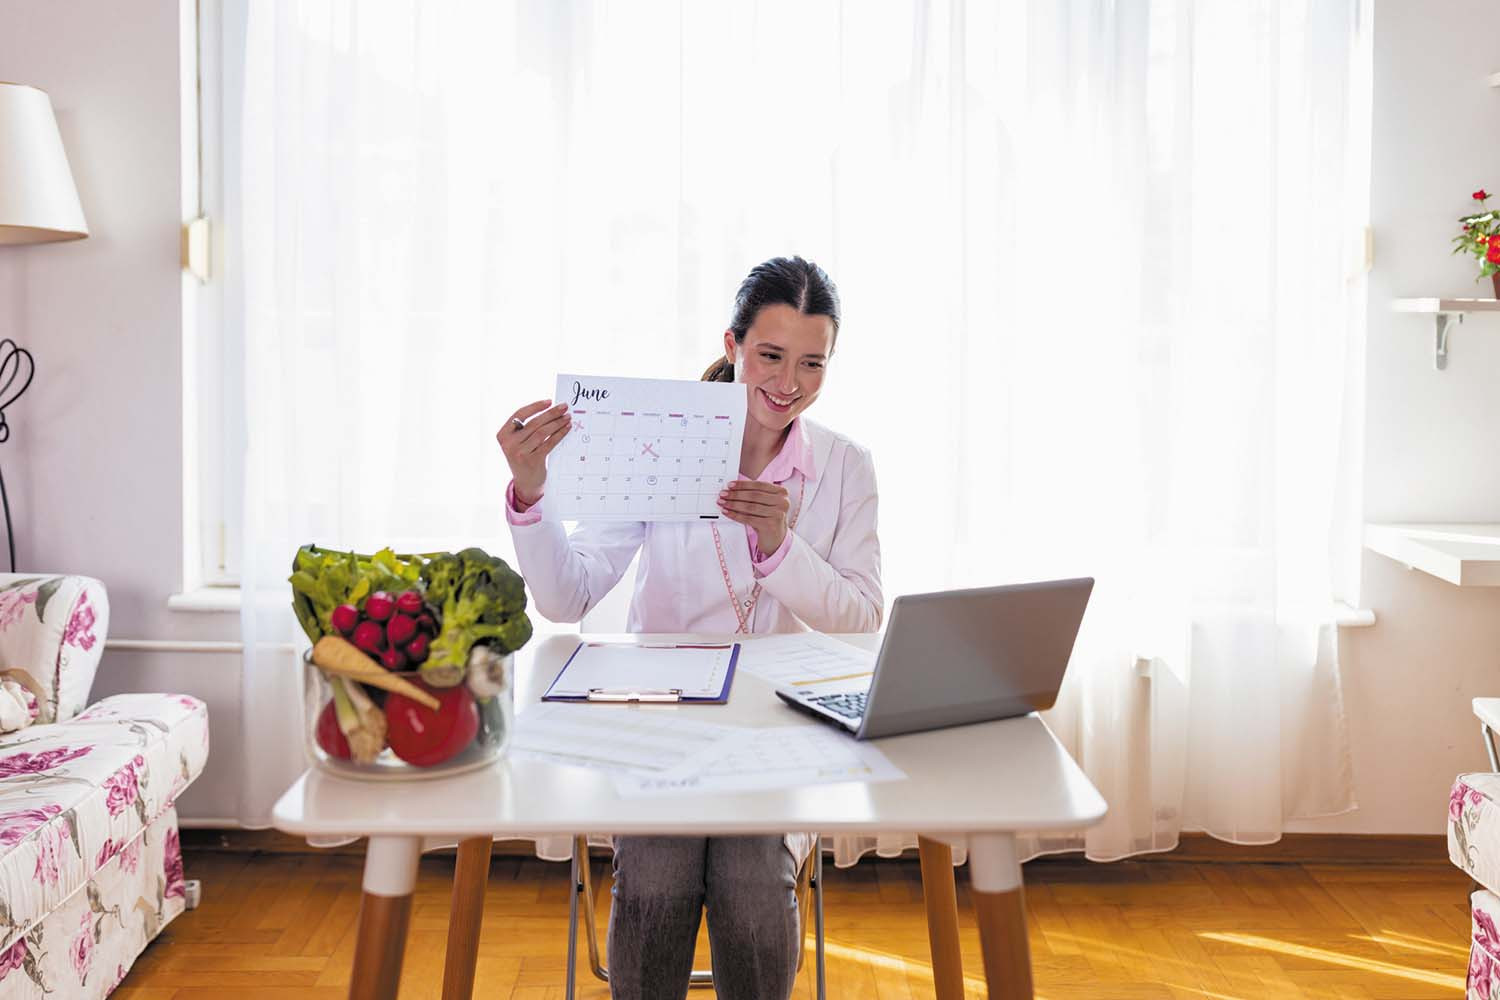 photo of a woman sitting at a small table, holding up a calendar page toward her laptop, suggesting she is in an oline meeting